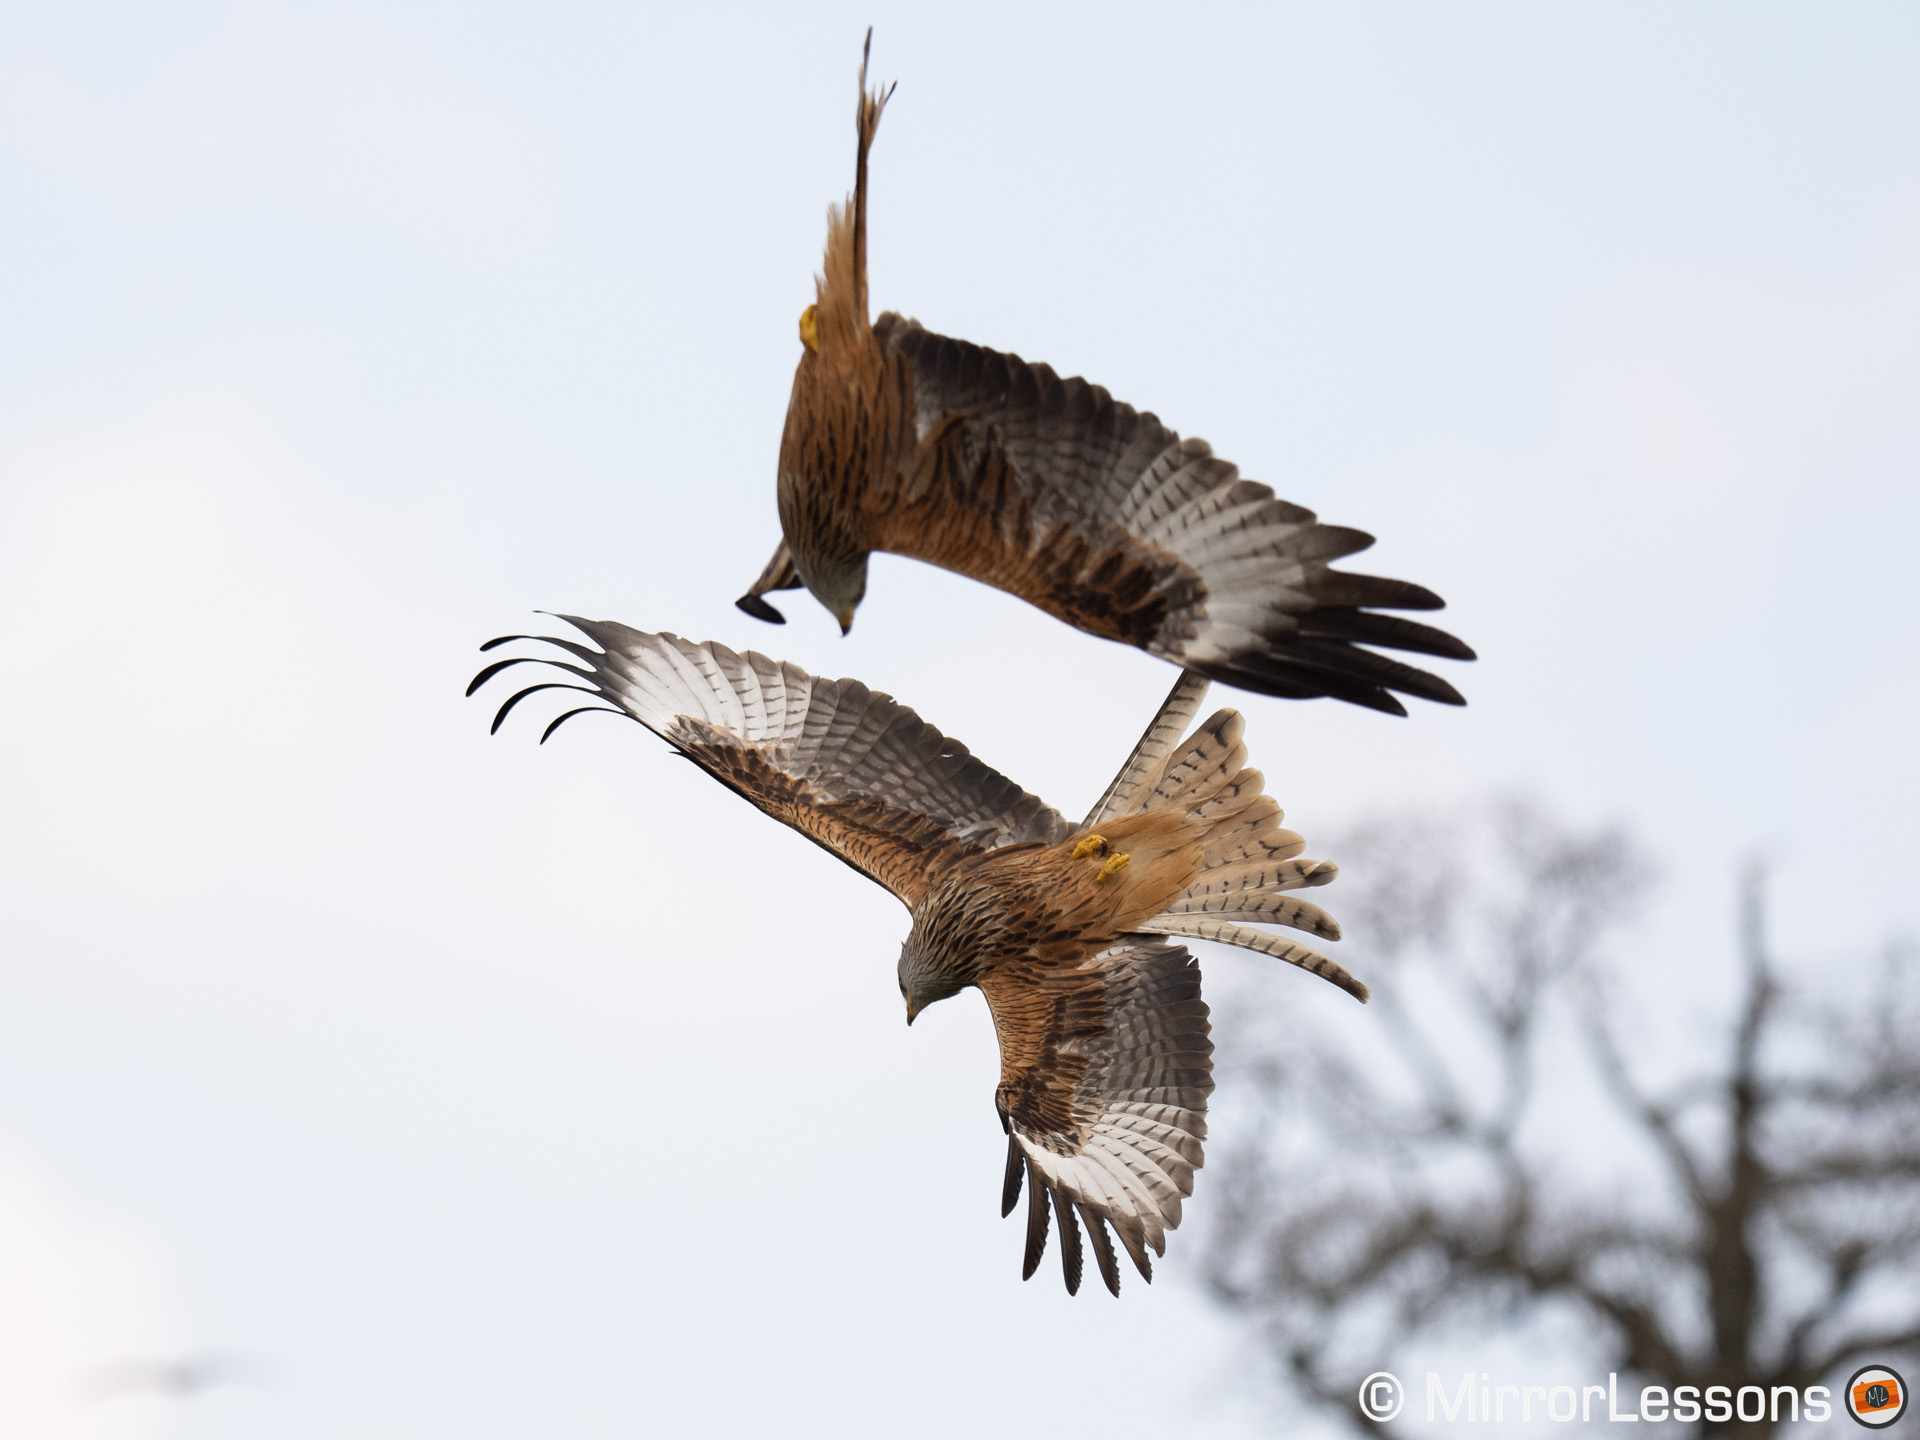 Red kite in flight with another one close to him